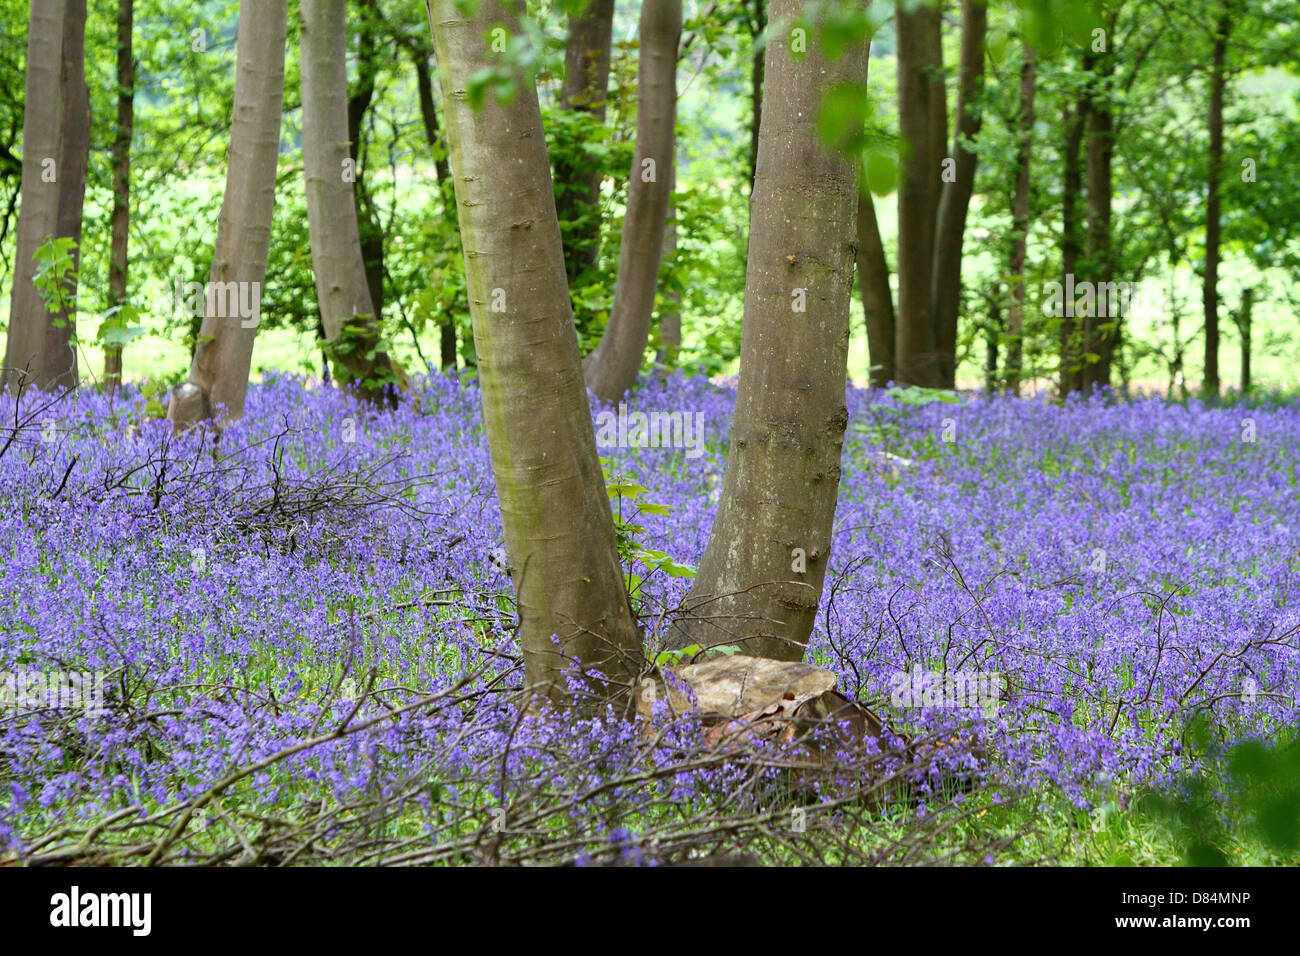 Everton, UK. 19th May, 2013. A carpet of bluebells aplenty in the woods at Everton, Bedfordshire. How fitting, same colour as Everton Football club near the village with the same name in Bedfordshire - May 19th 2013  Photo by Keith Mayhew/Alamy Live News Stock Photo